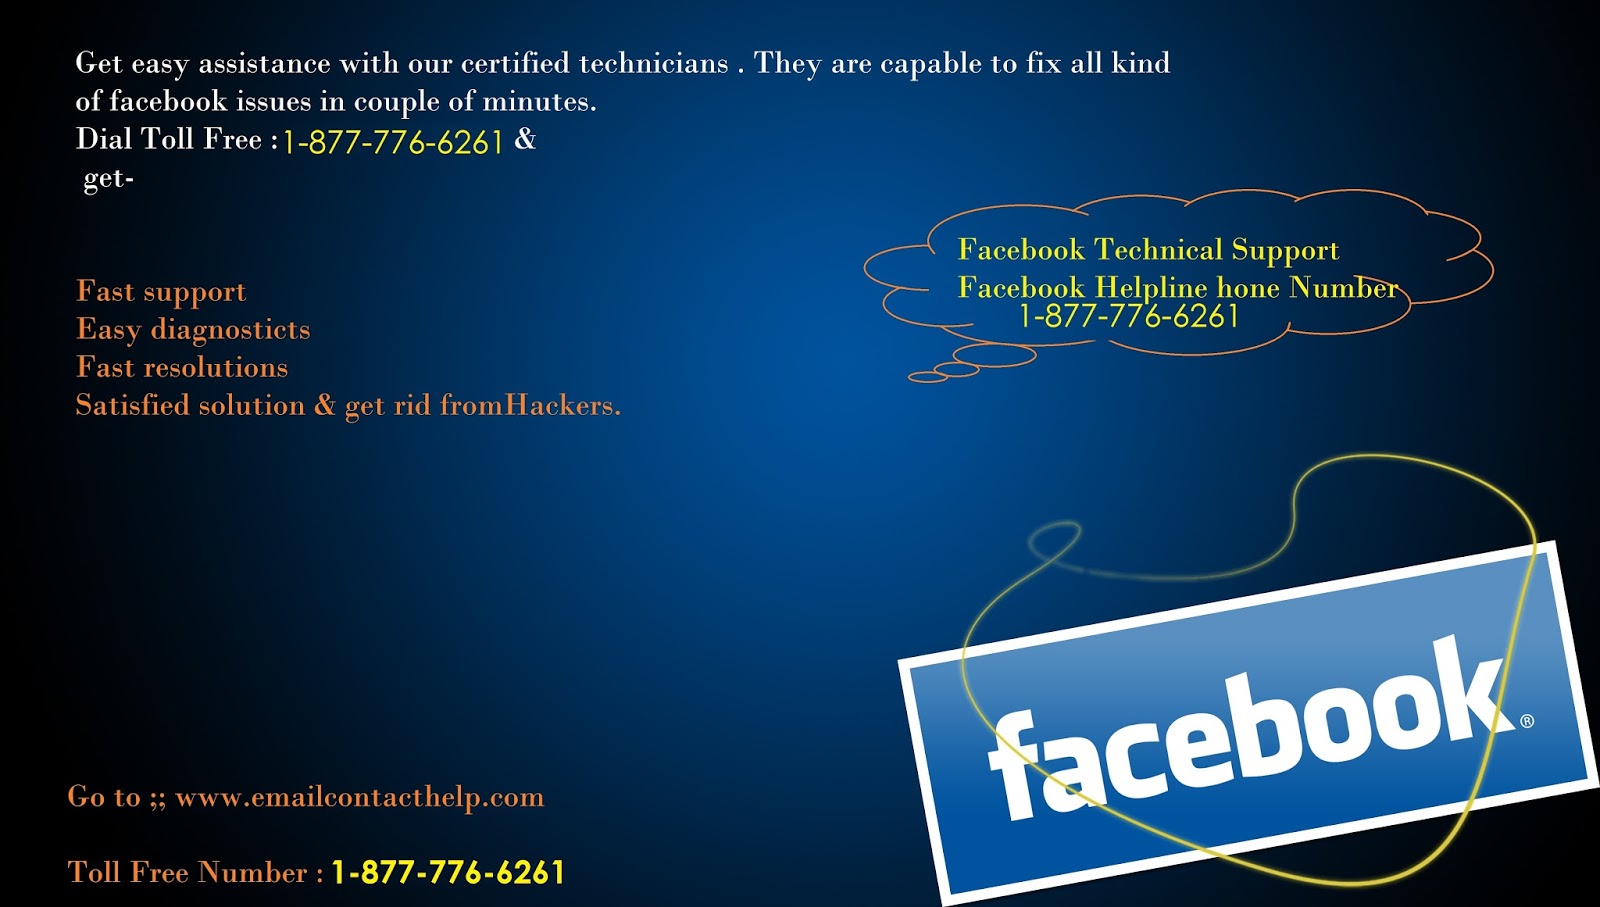 facebook technical 1-877-776-6261 support number usa & canada: for